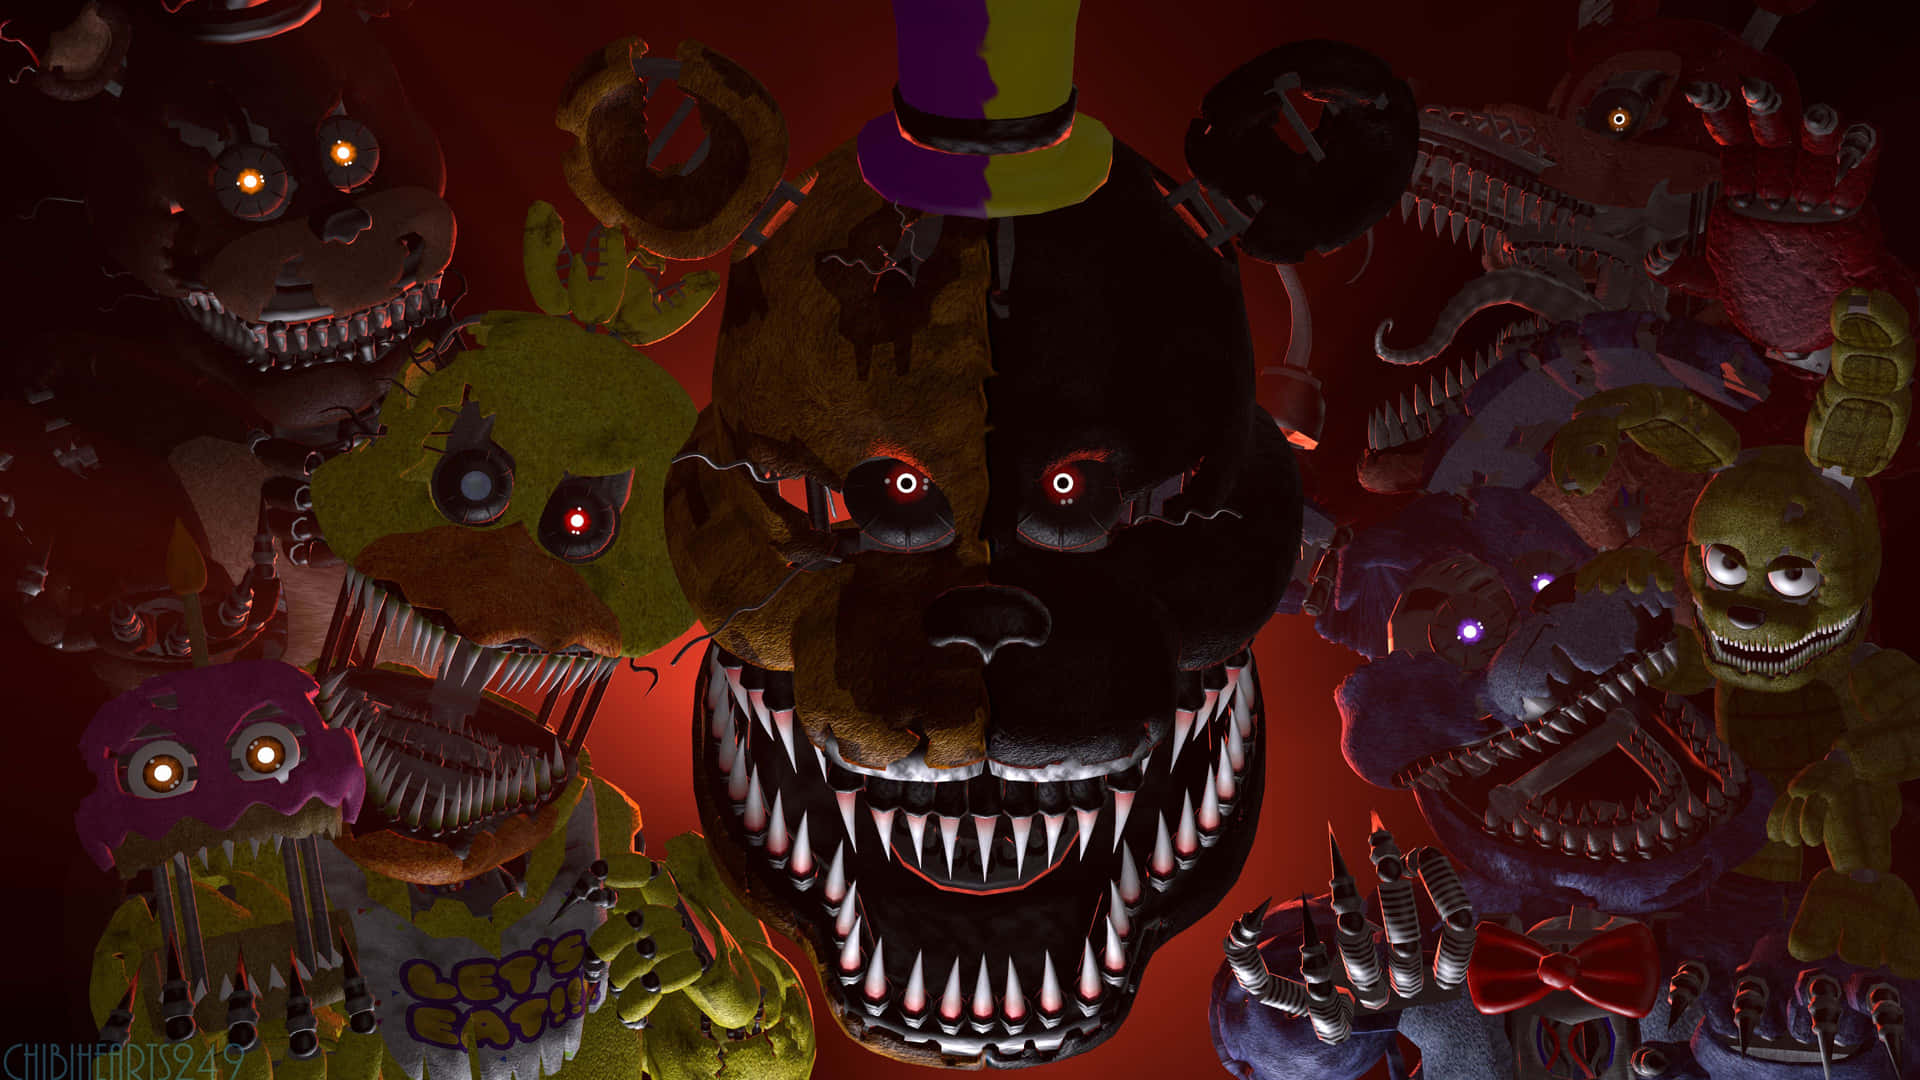  Five Nights at Freddy's Horror Video Game Characters